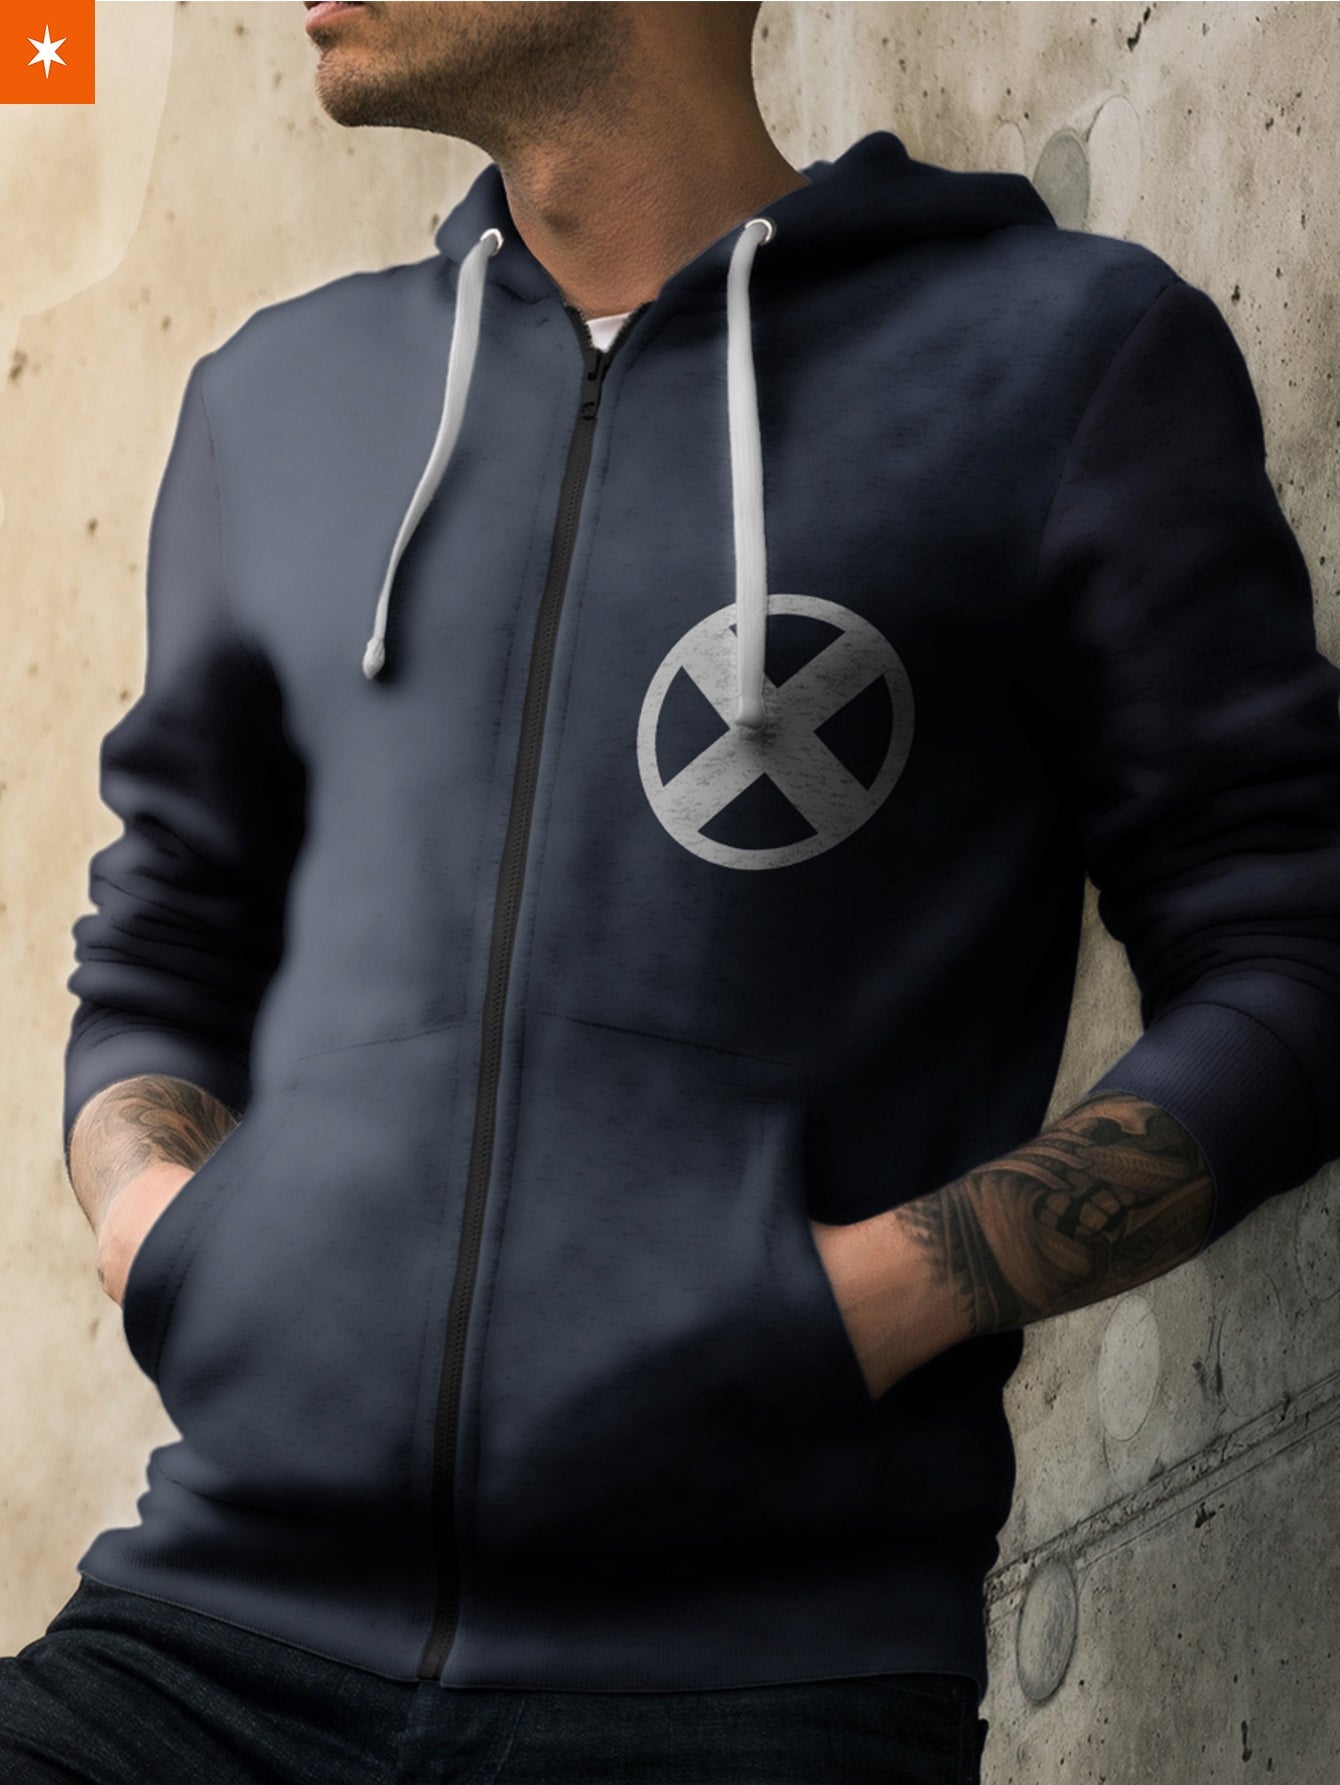 Fandomaniax - Xavier School for Gifted Youngsters Unisex Zipped Hoodie